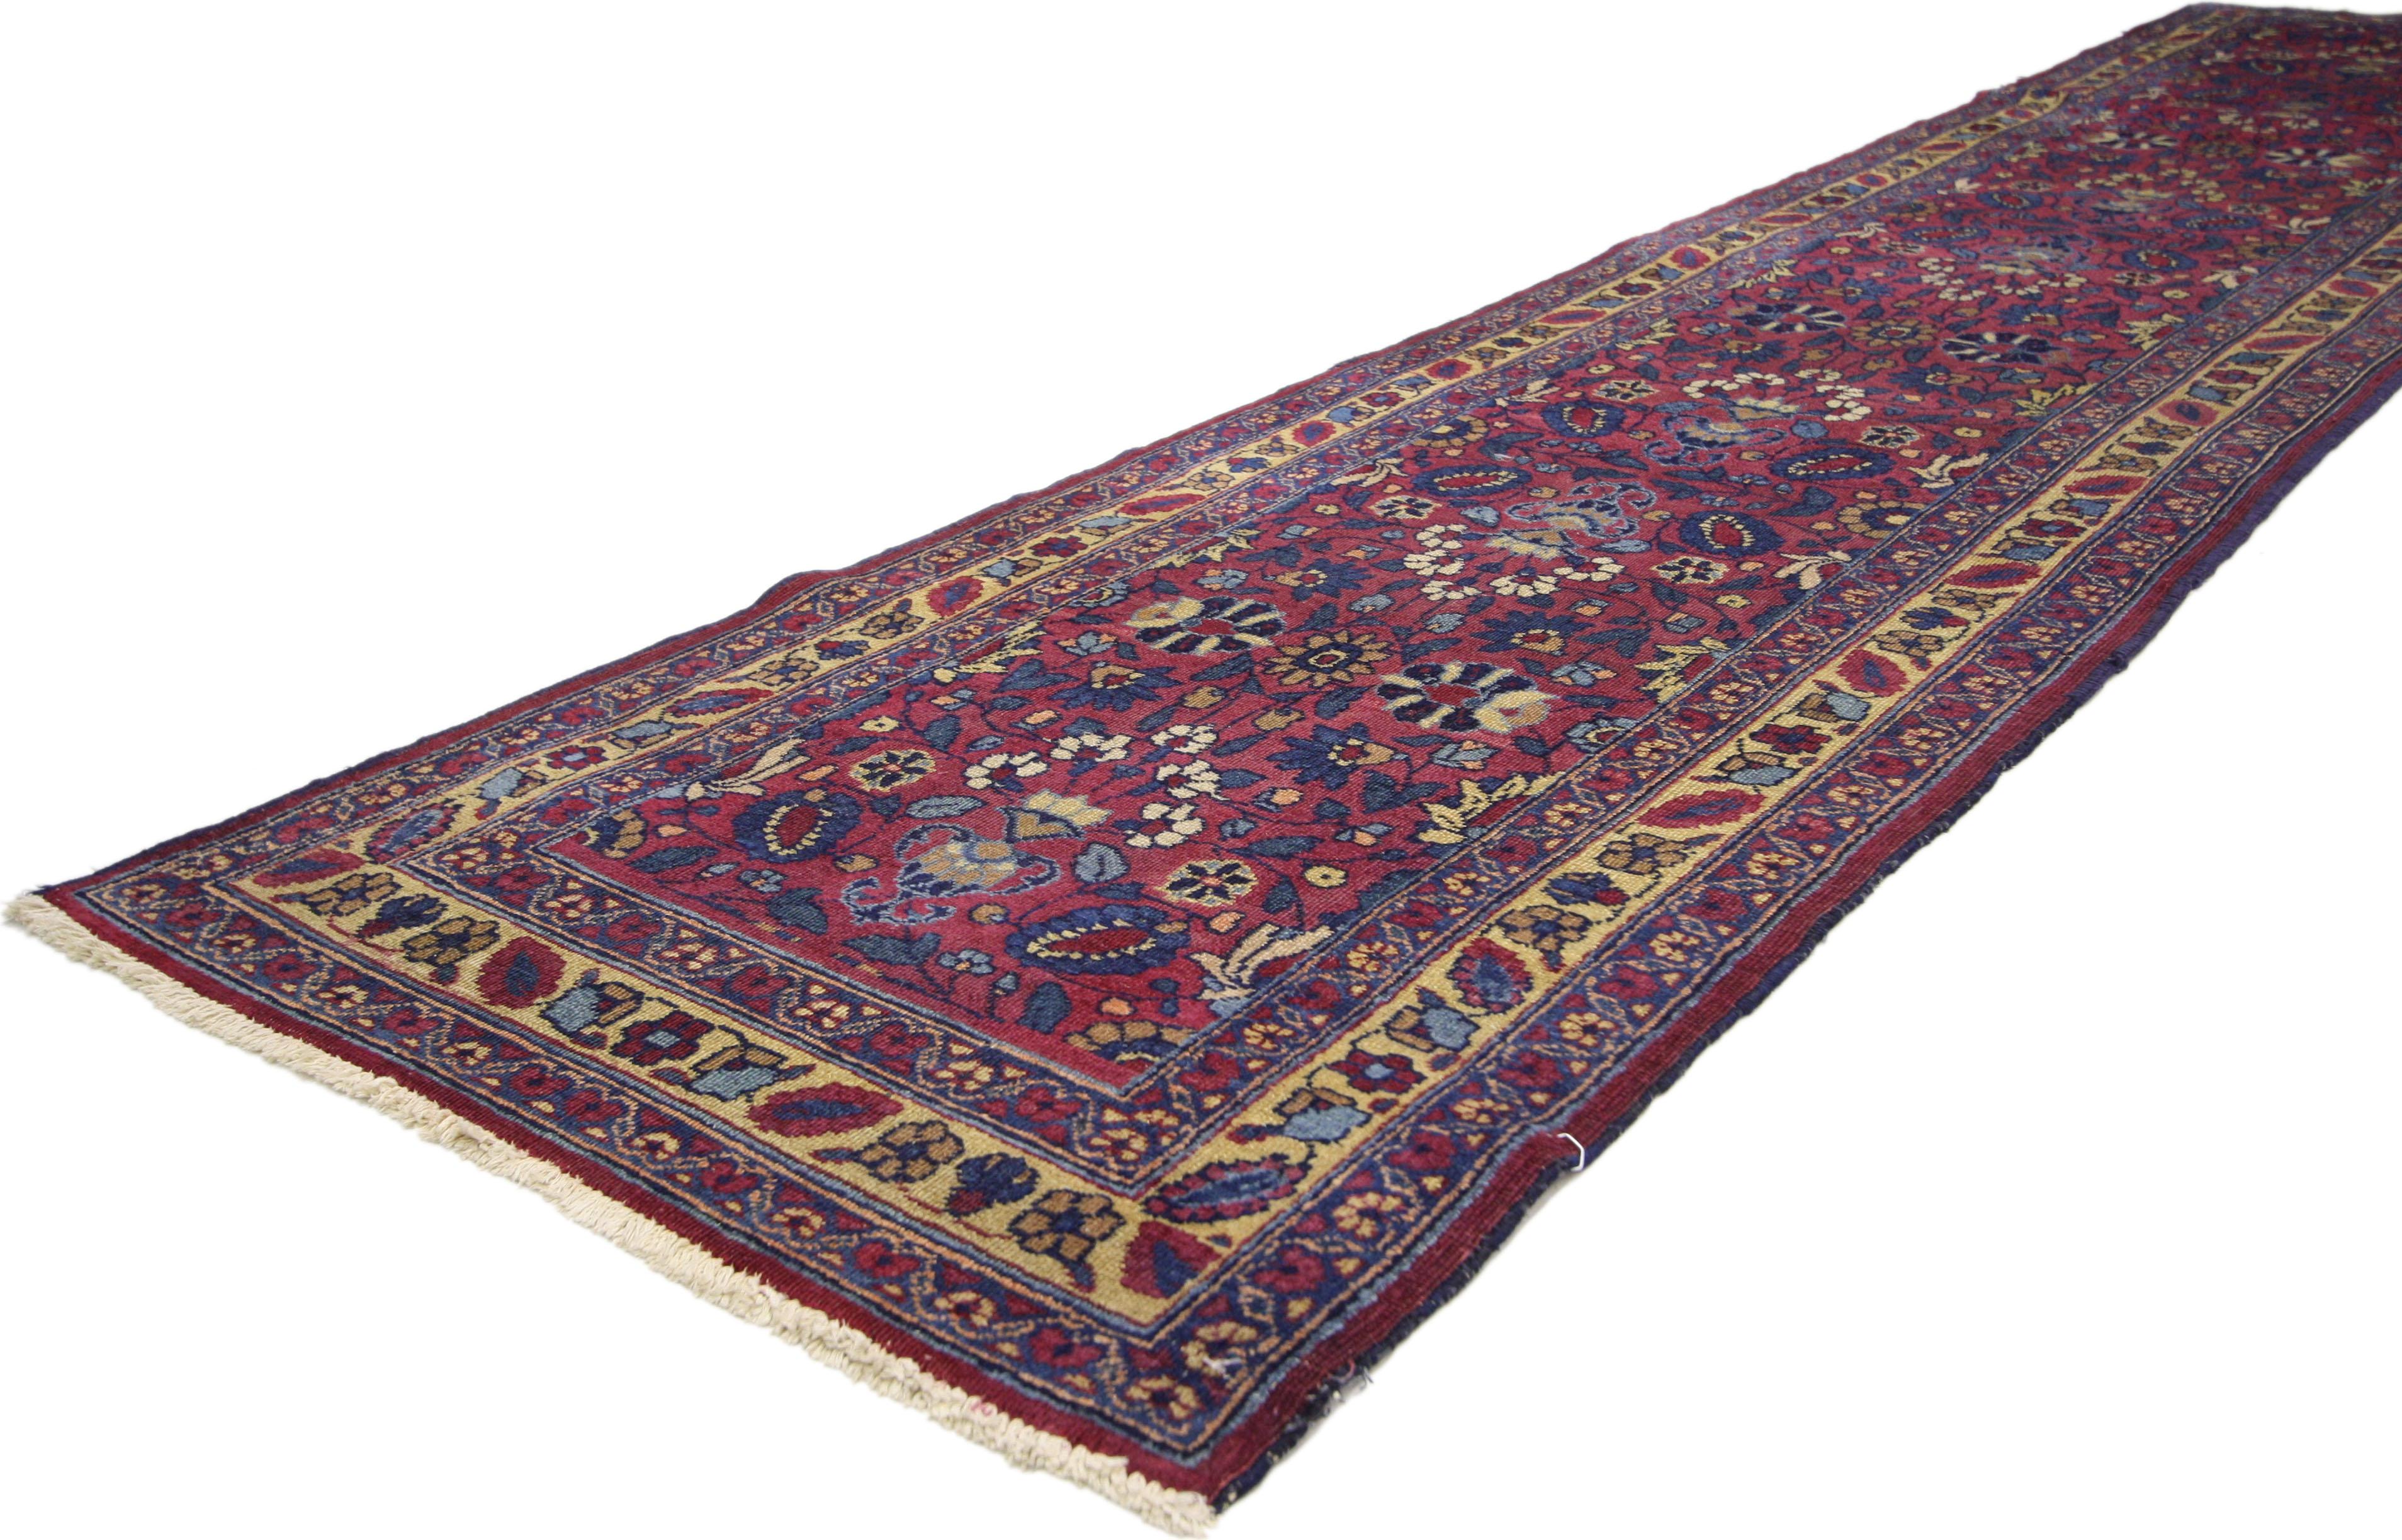 71710 antique Persian Mashhad runner, Traditional Hallway runner. Like a cornucopia of blossoms, the all-over pattern of this antique Persian Mashhad runner is a bountiful display of repeating multicolor florals filling abstract vase-like vessels.